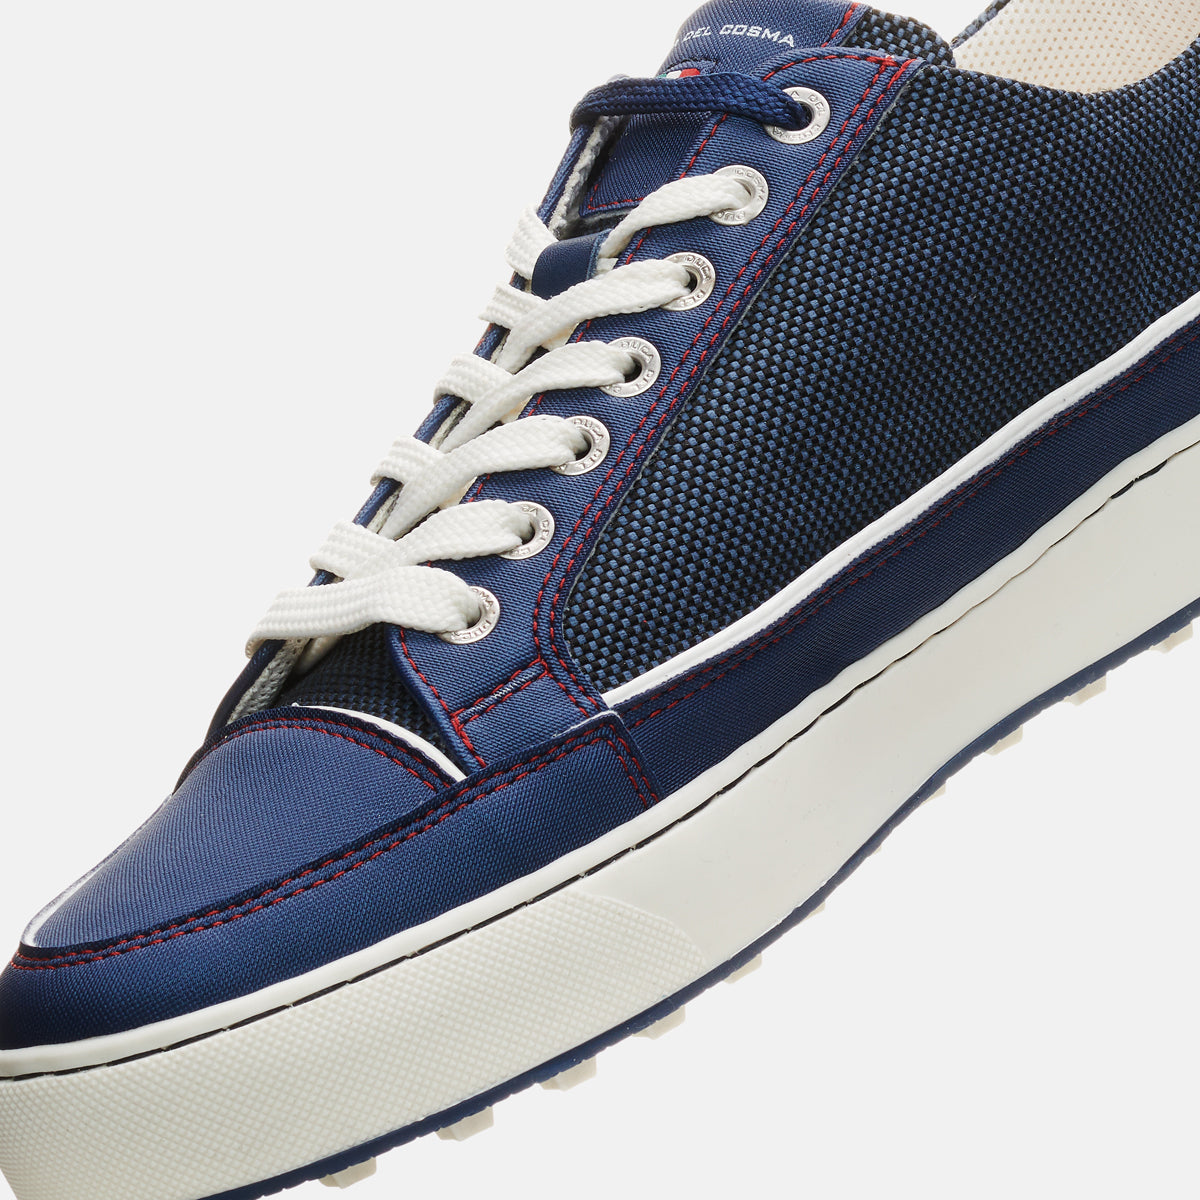 Laguna blue men's golf shoe is the best golf shoe for on and off the golf course